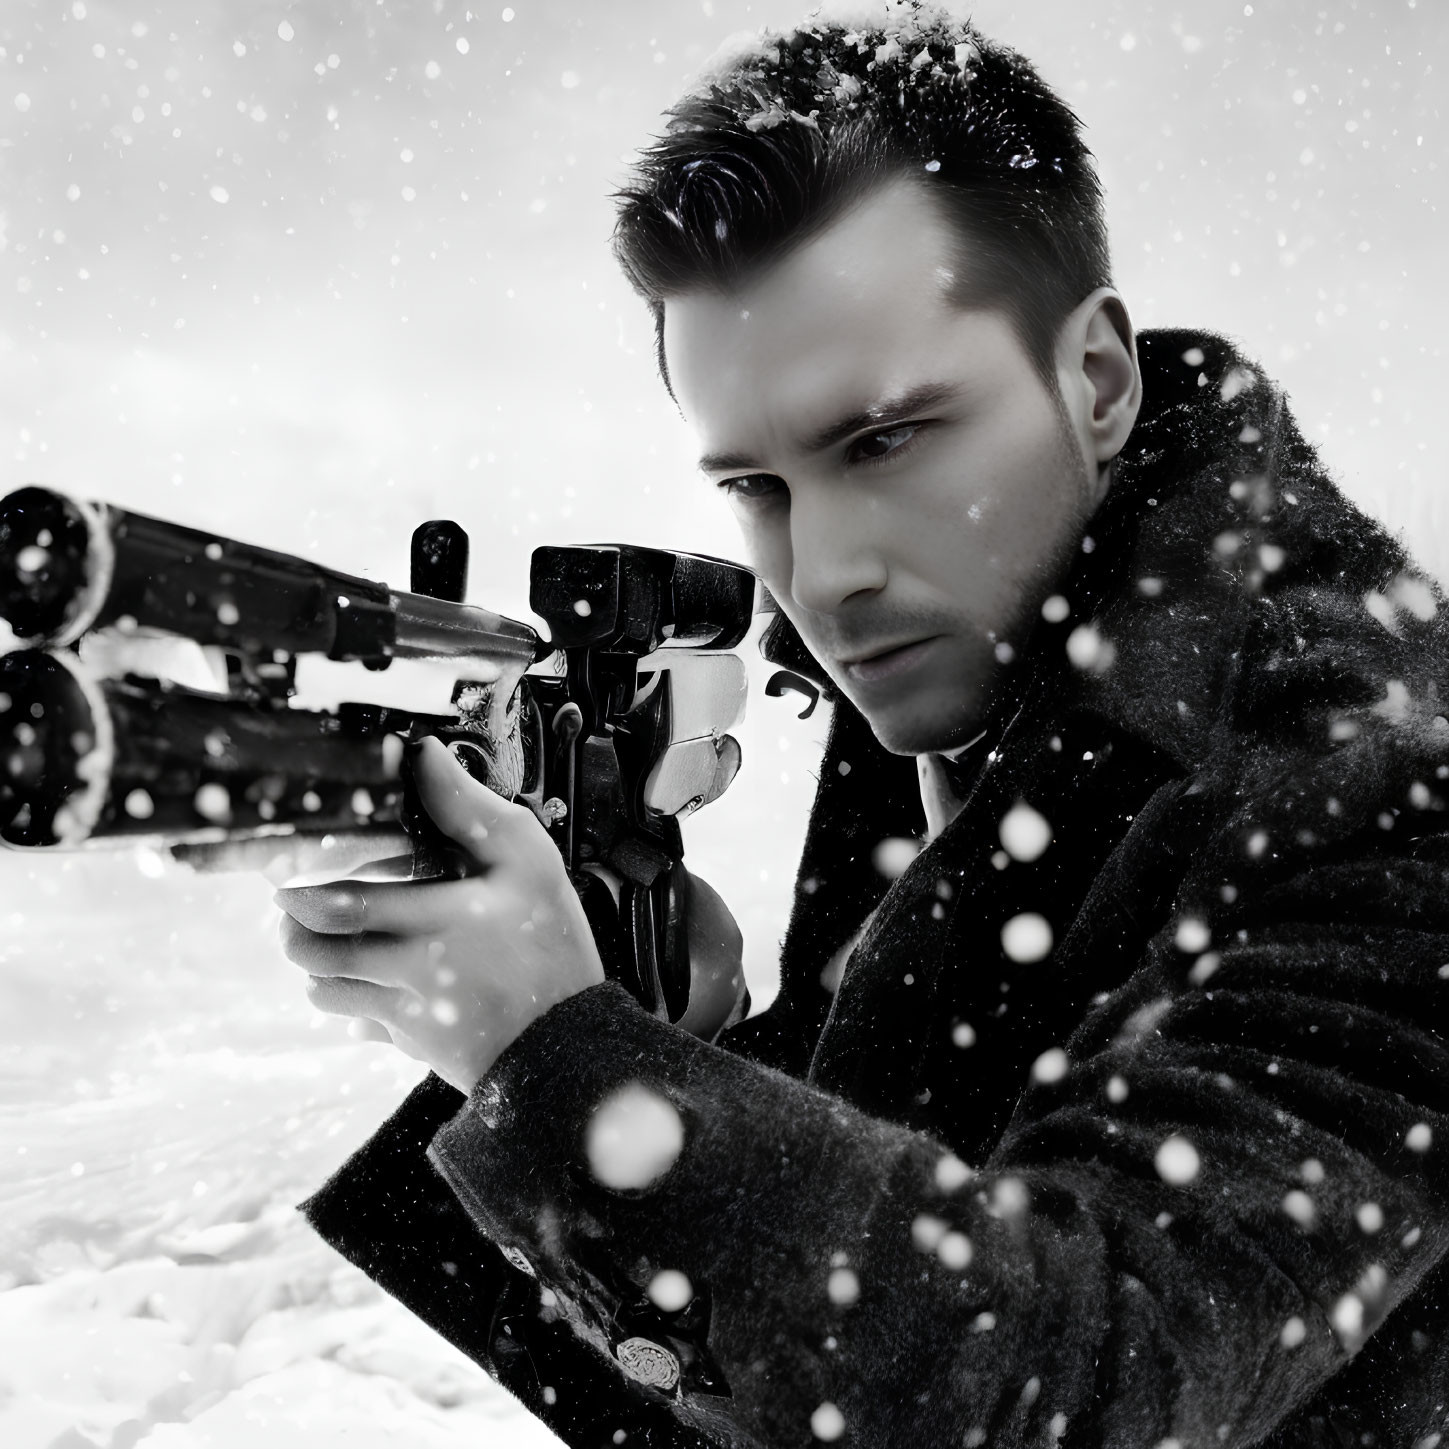 Man aiming rifle with scope in snowy wintry scene